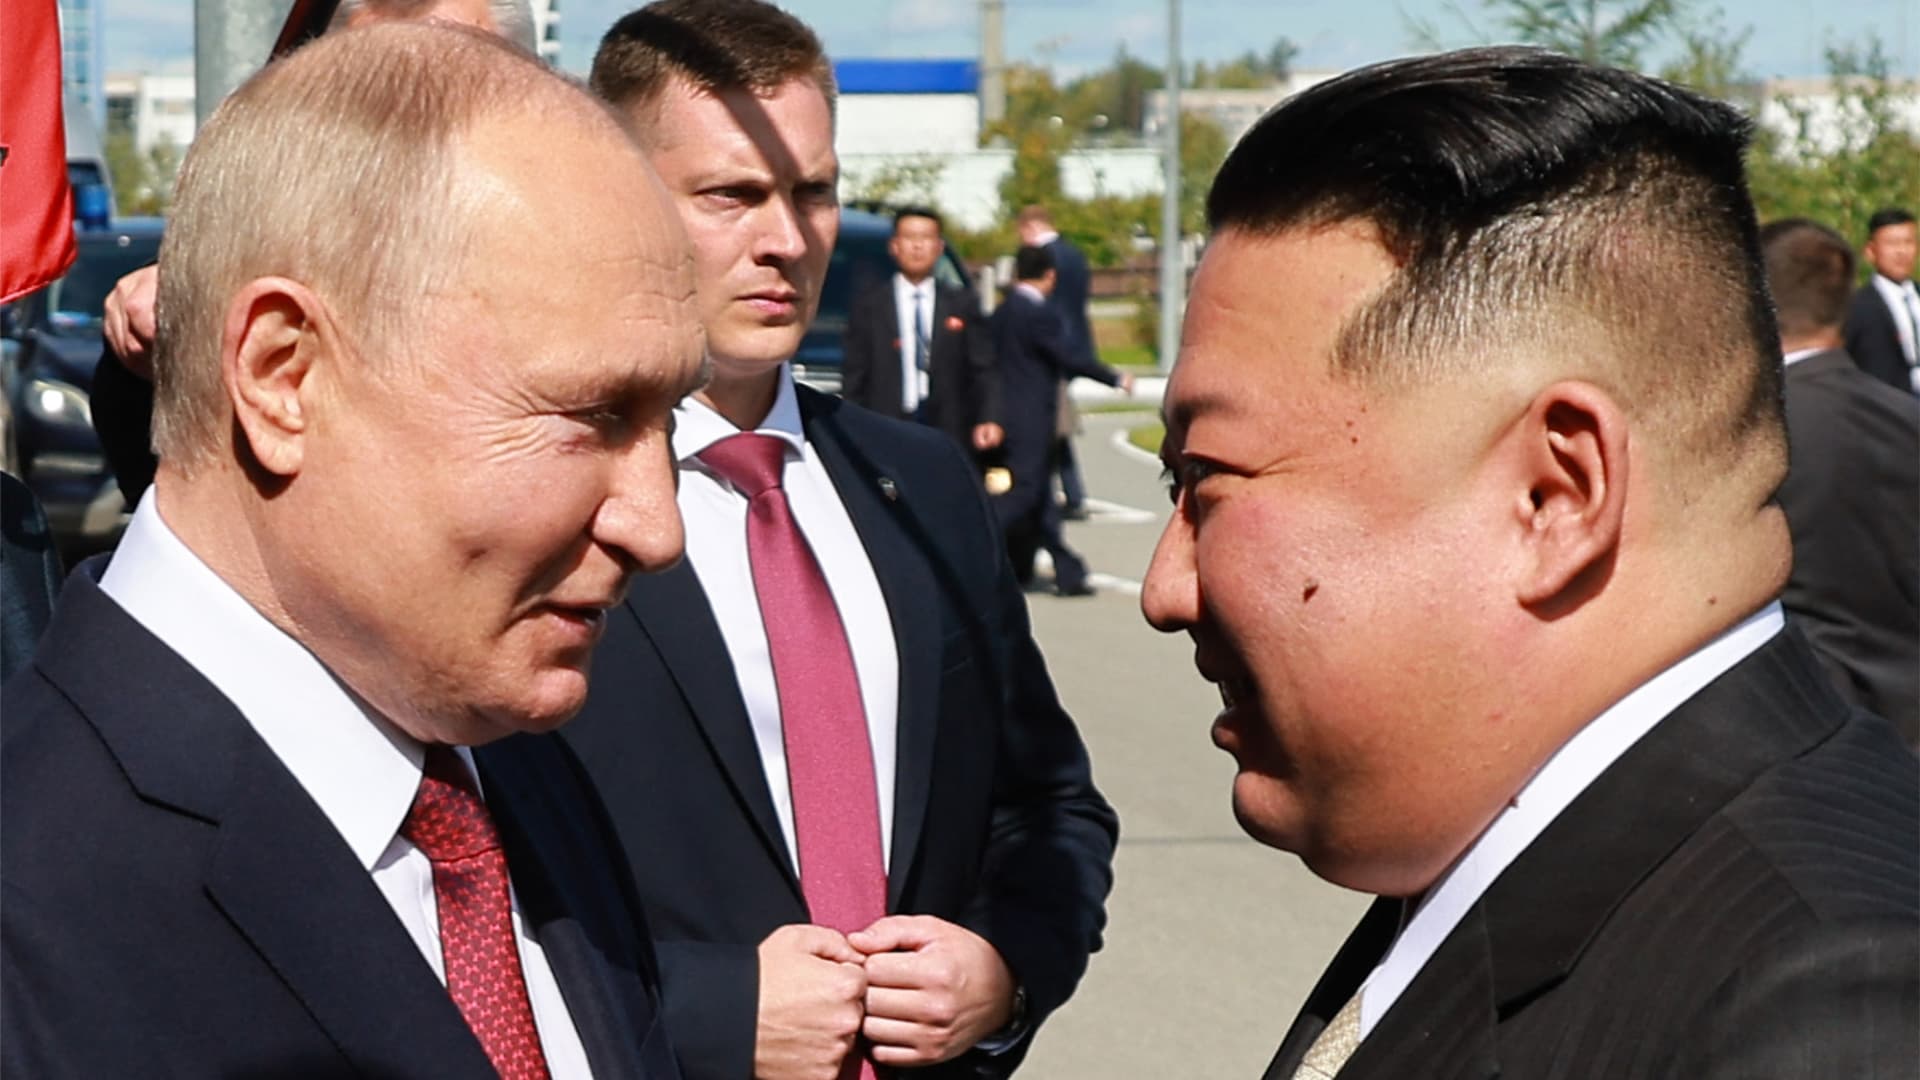 ‘A threat like no other’: The West watches on concerned as Putin visits North Korea for the first time in years